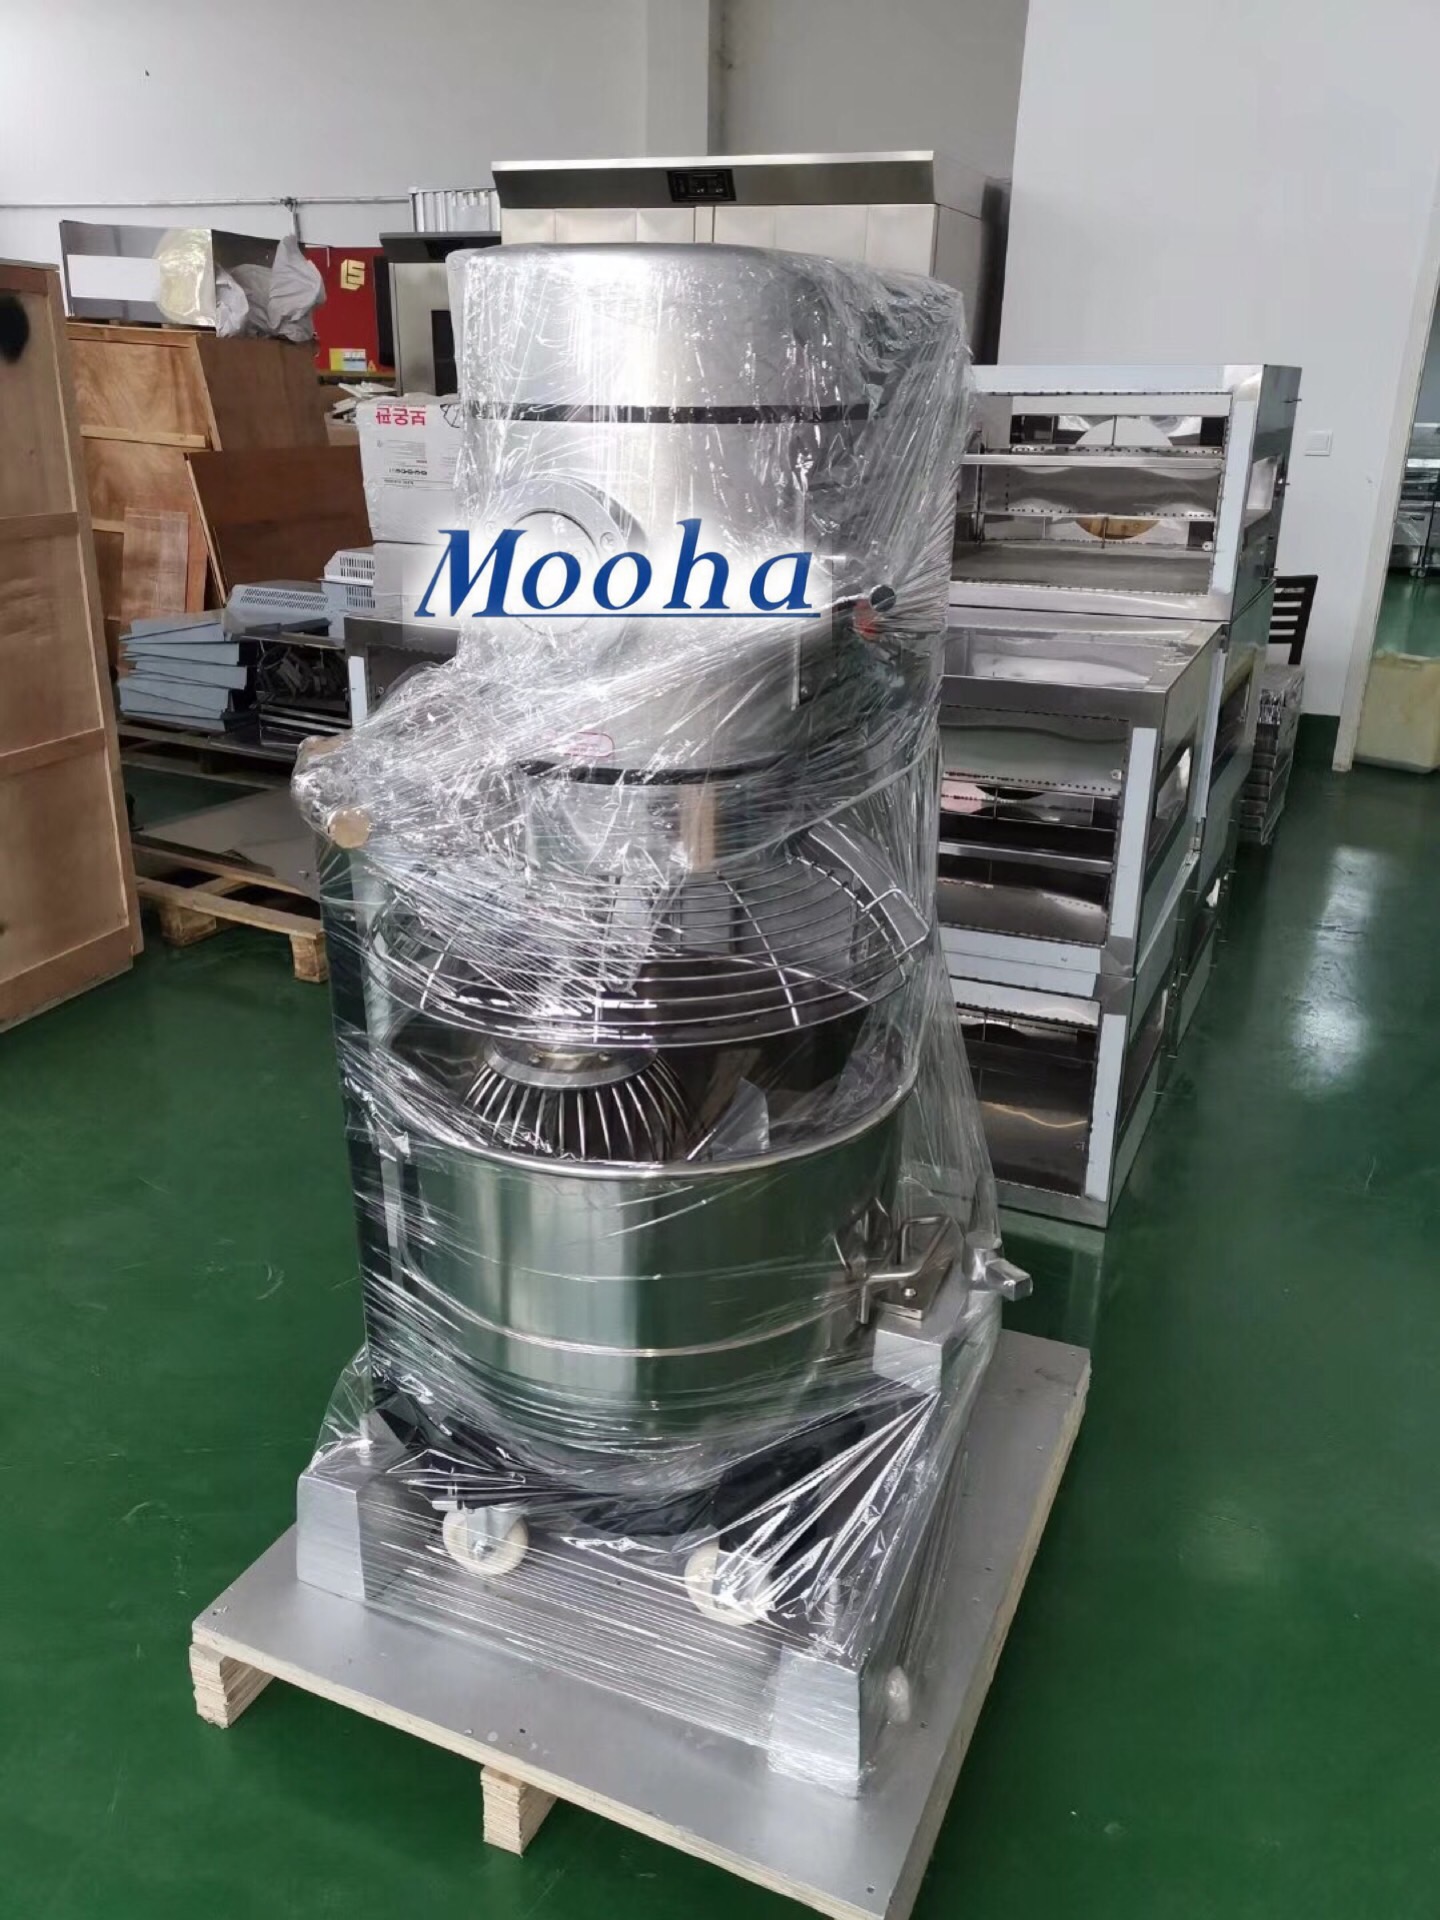 Commercial 50 Liters Planetary Mixer High Quality 5-9 KG powder Kneading Cake Biscuits Cookies Cream Egg Butter Mixing Bakery Machine